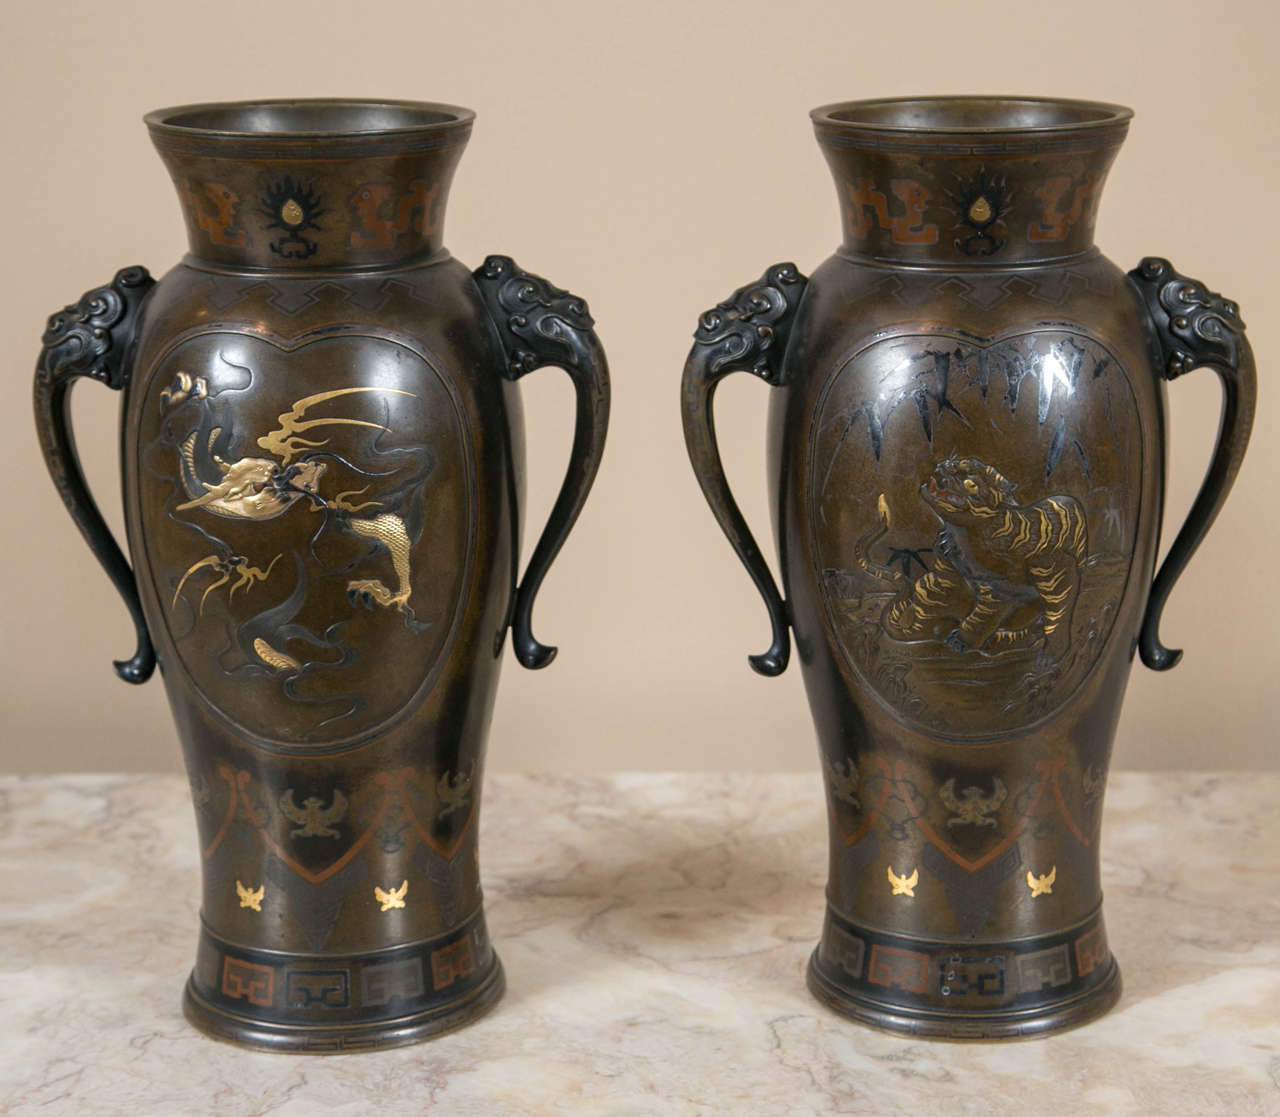 A stunning pair of 19th Century Meiji period, Japanese bronze and mixed metal vases having stylized elephant ear handles and high-relief gold and silver inlay.